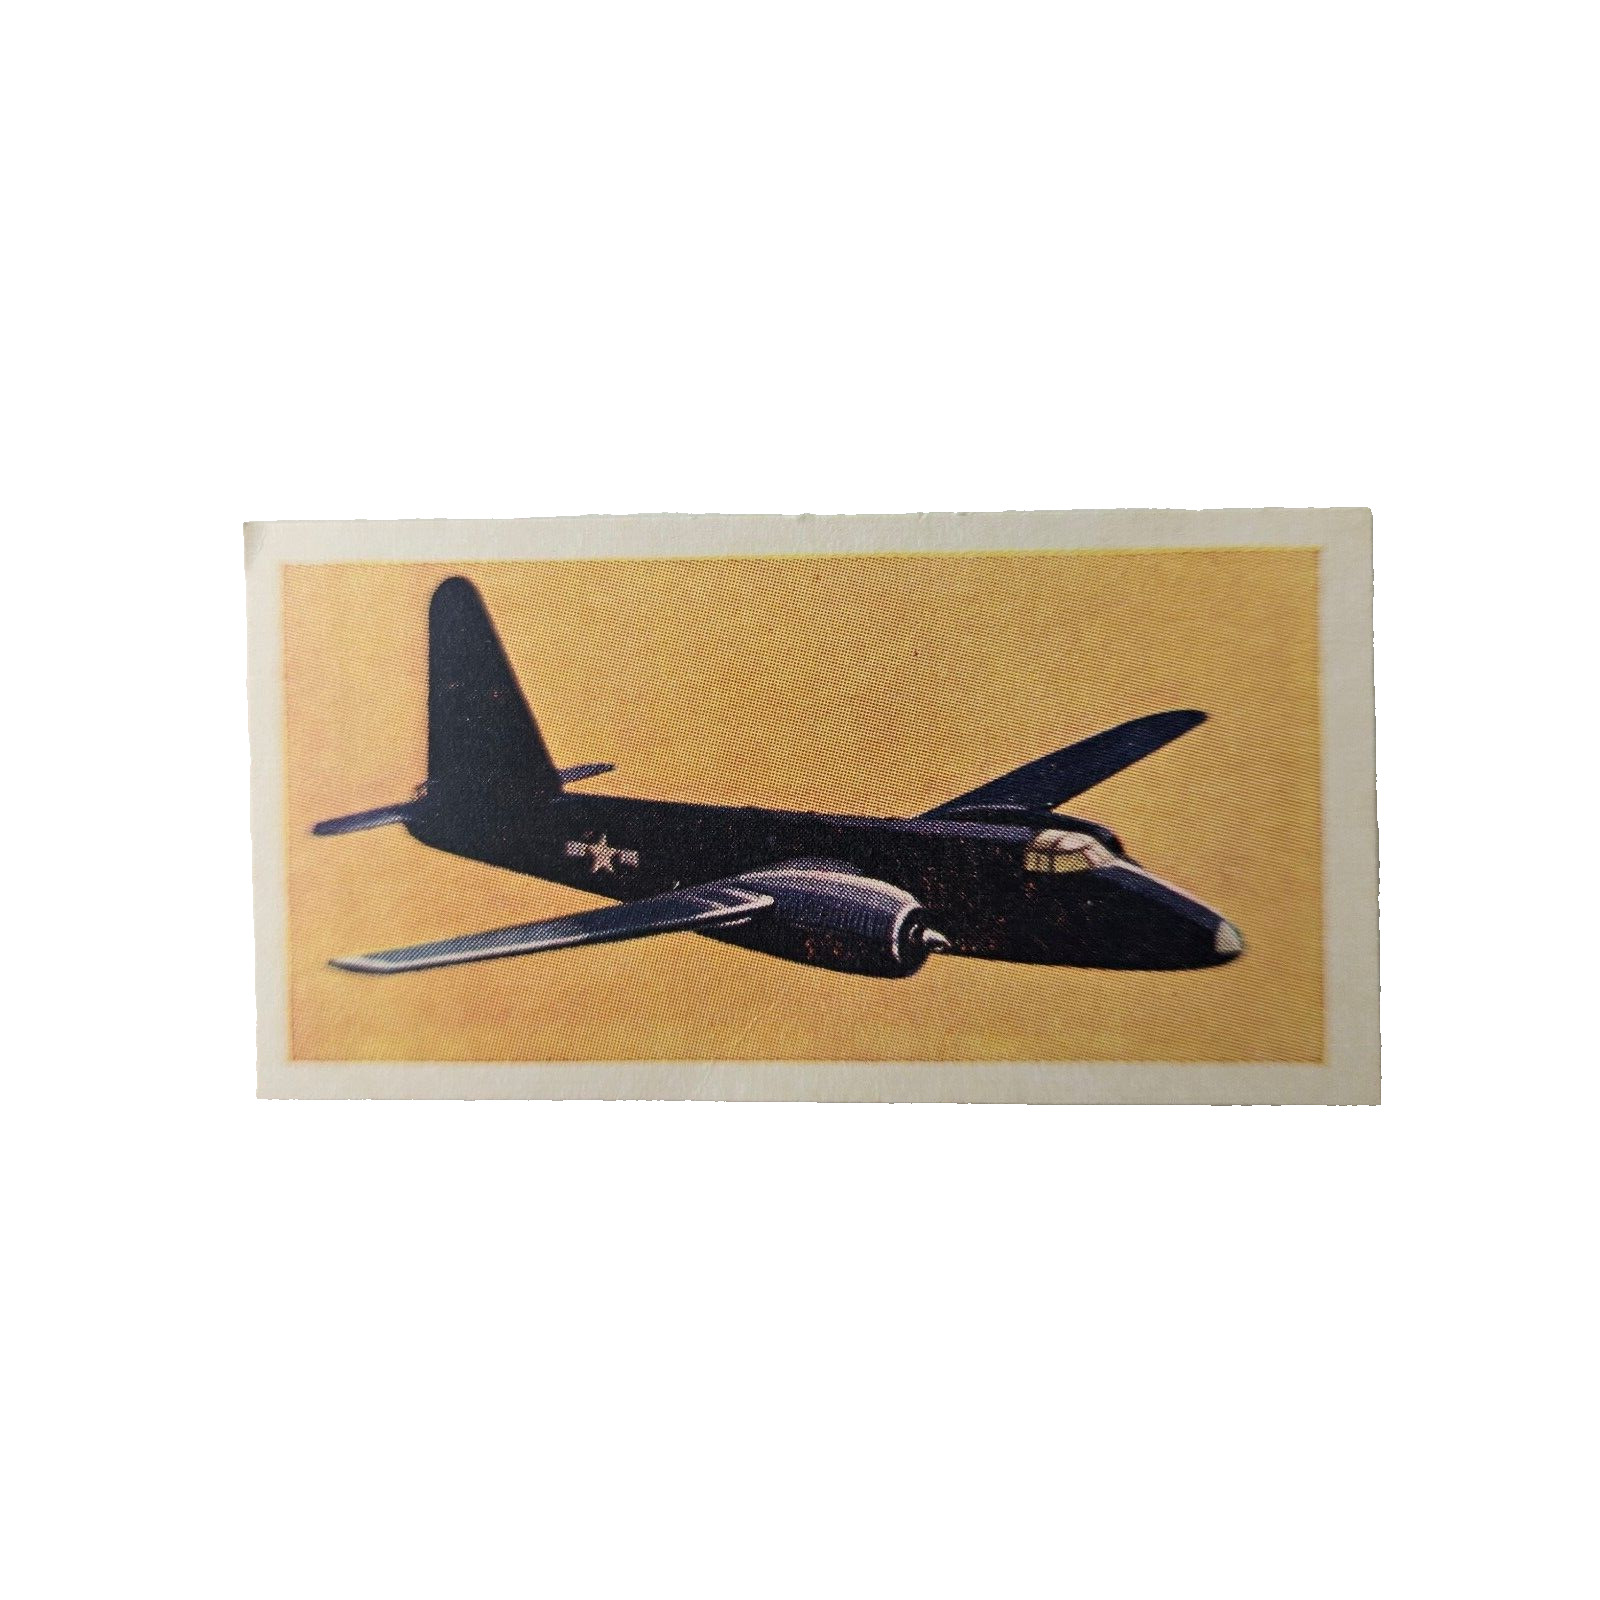 1959 Cadet Sweets Record Holders of the World #34 Lockheed Neptune (A)